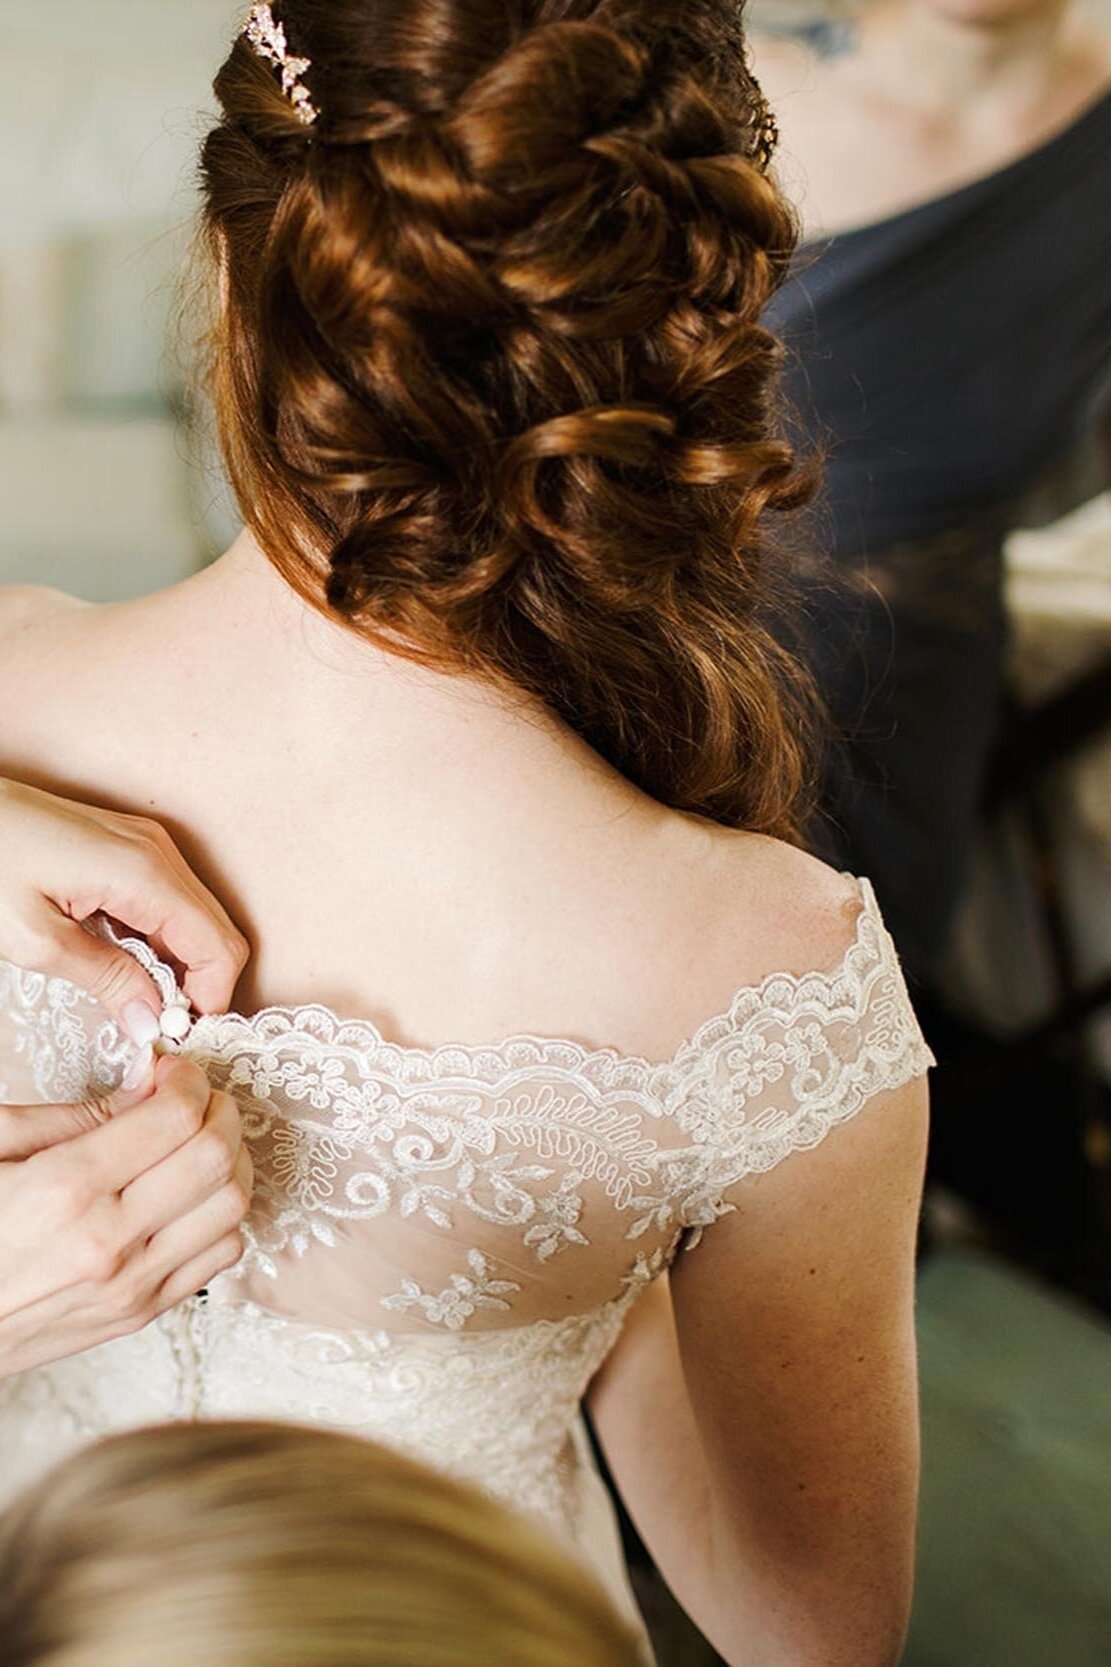 Bride Getting Zipped Up by Maid of Honor Detail